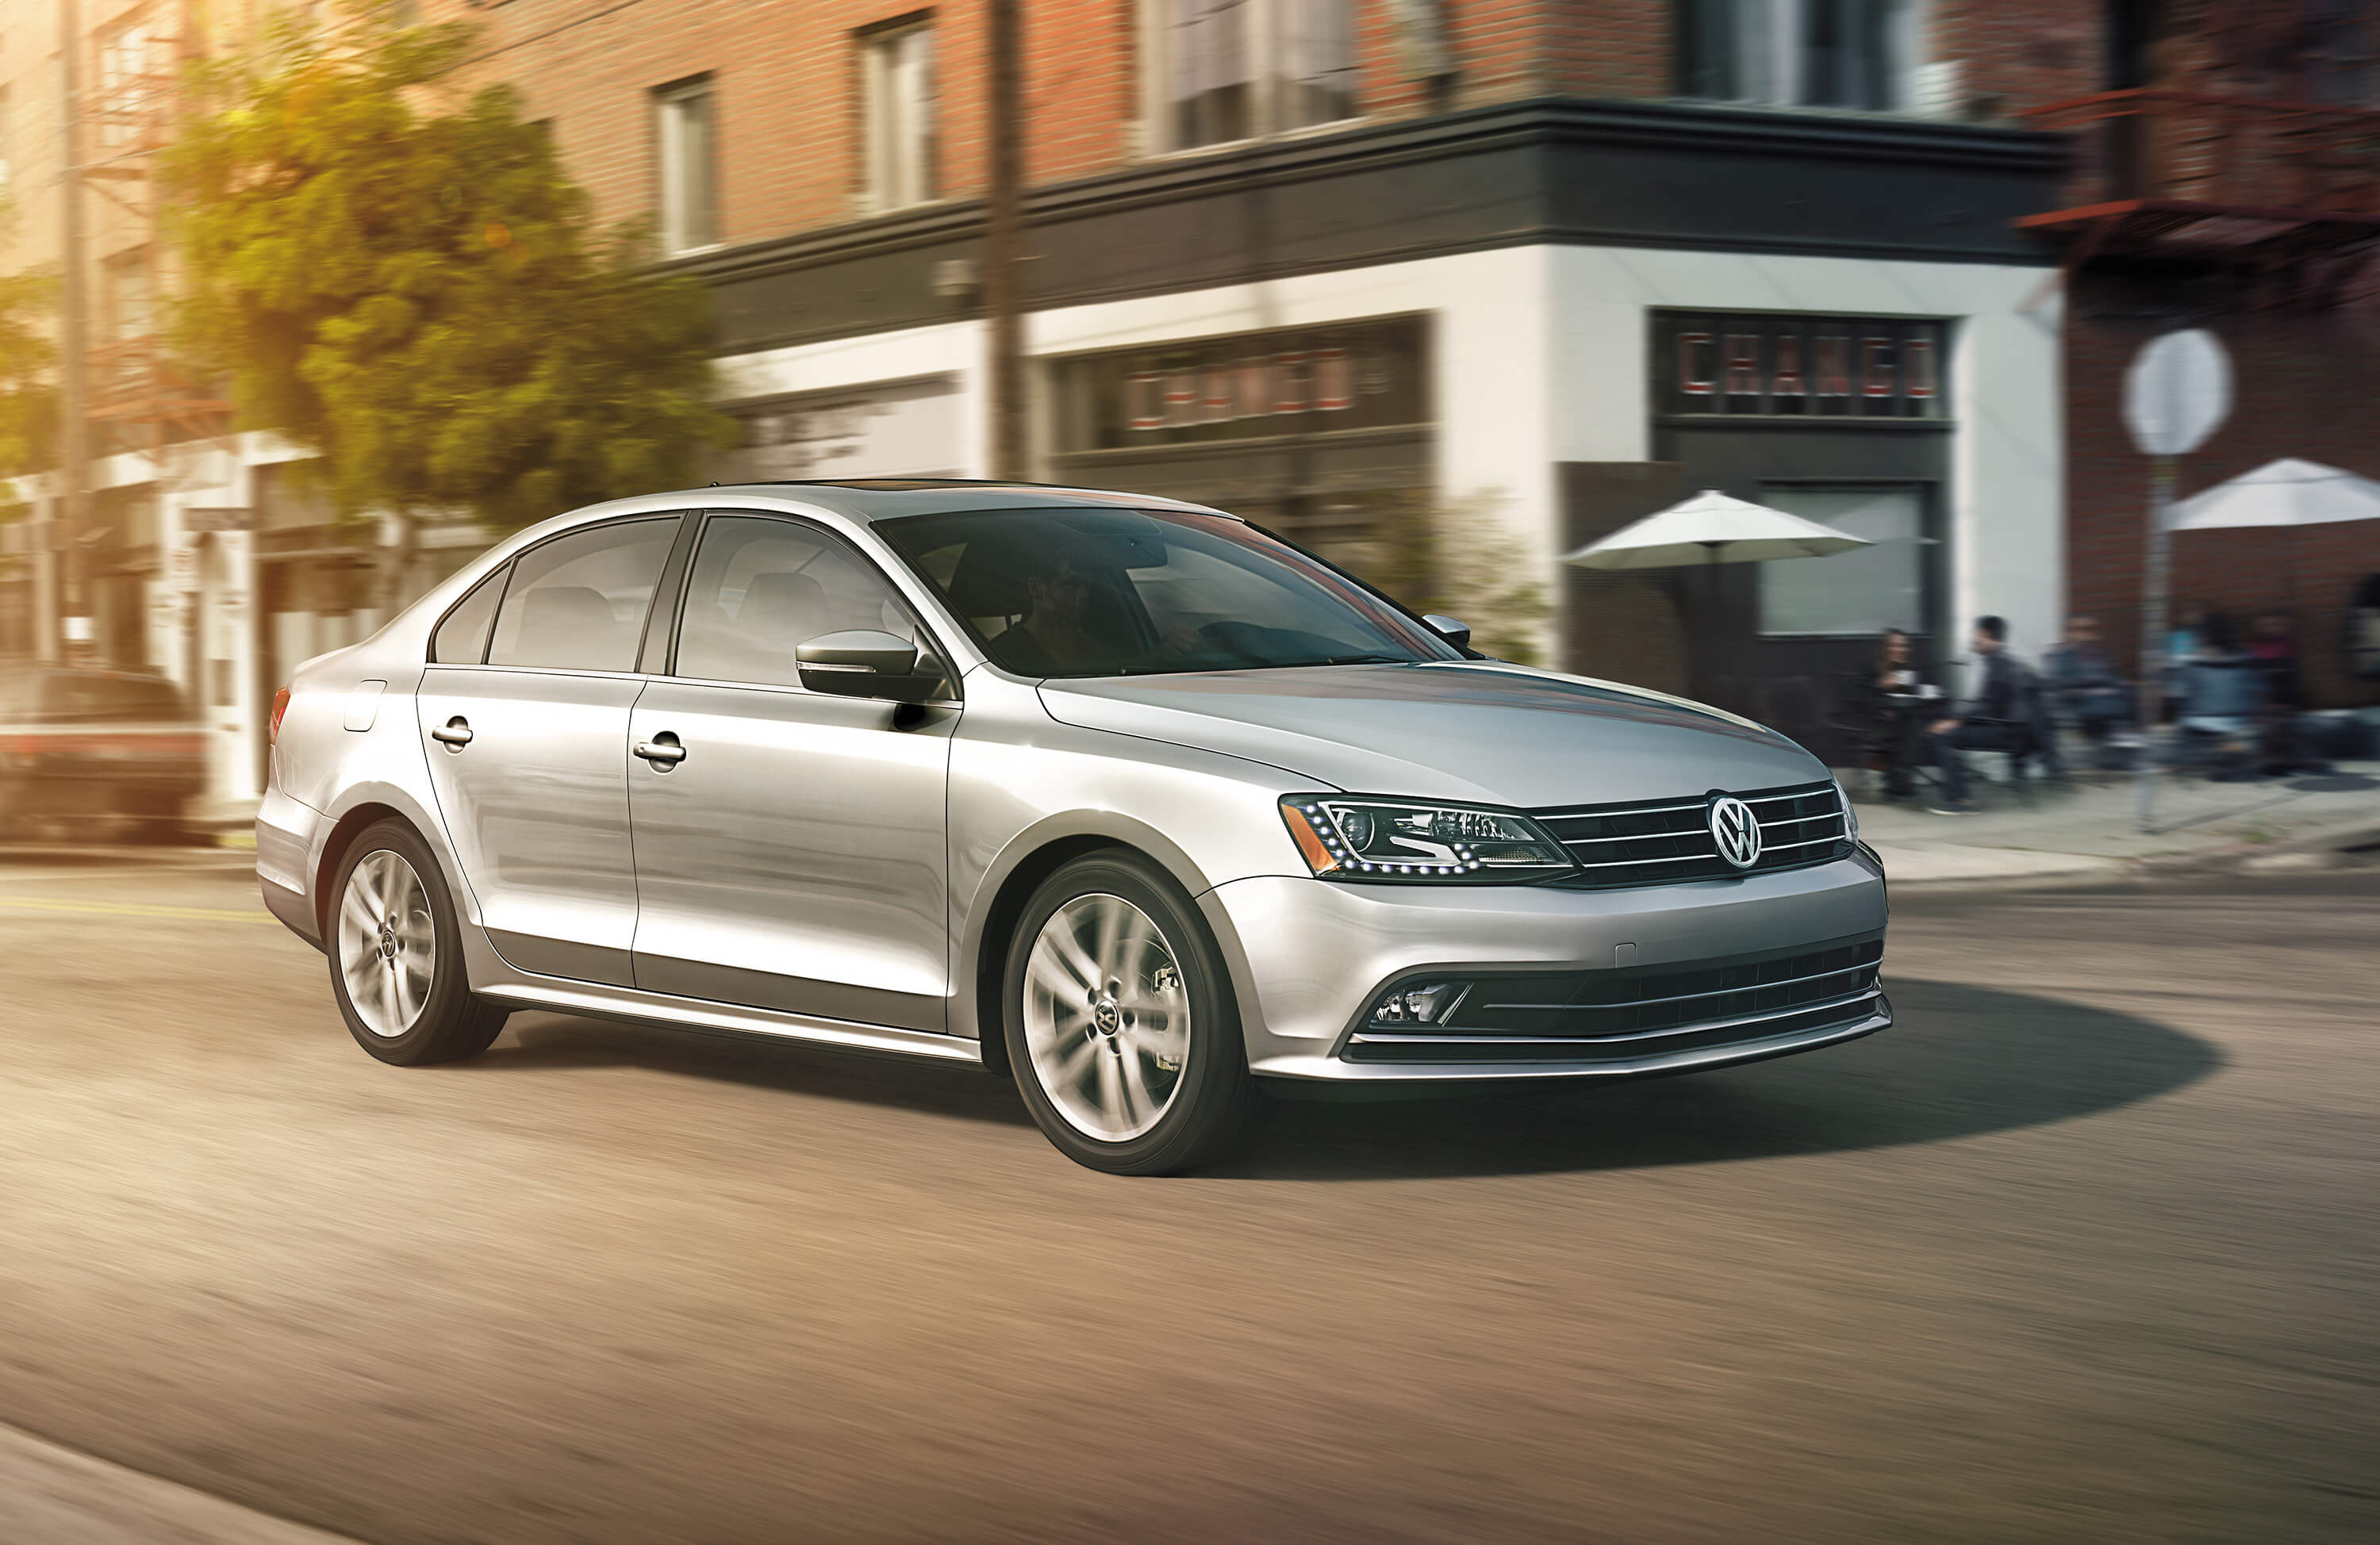 Volkswagen Jetta, 2016 model, Research and review page, 3000x1950 HD Desktop